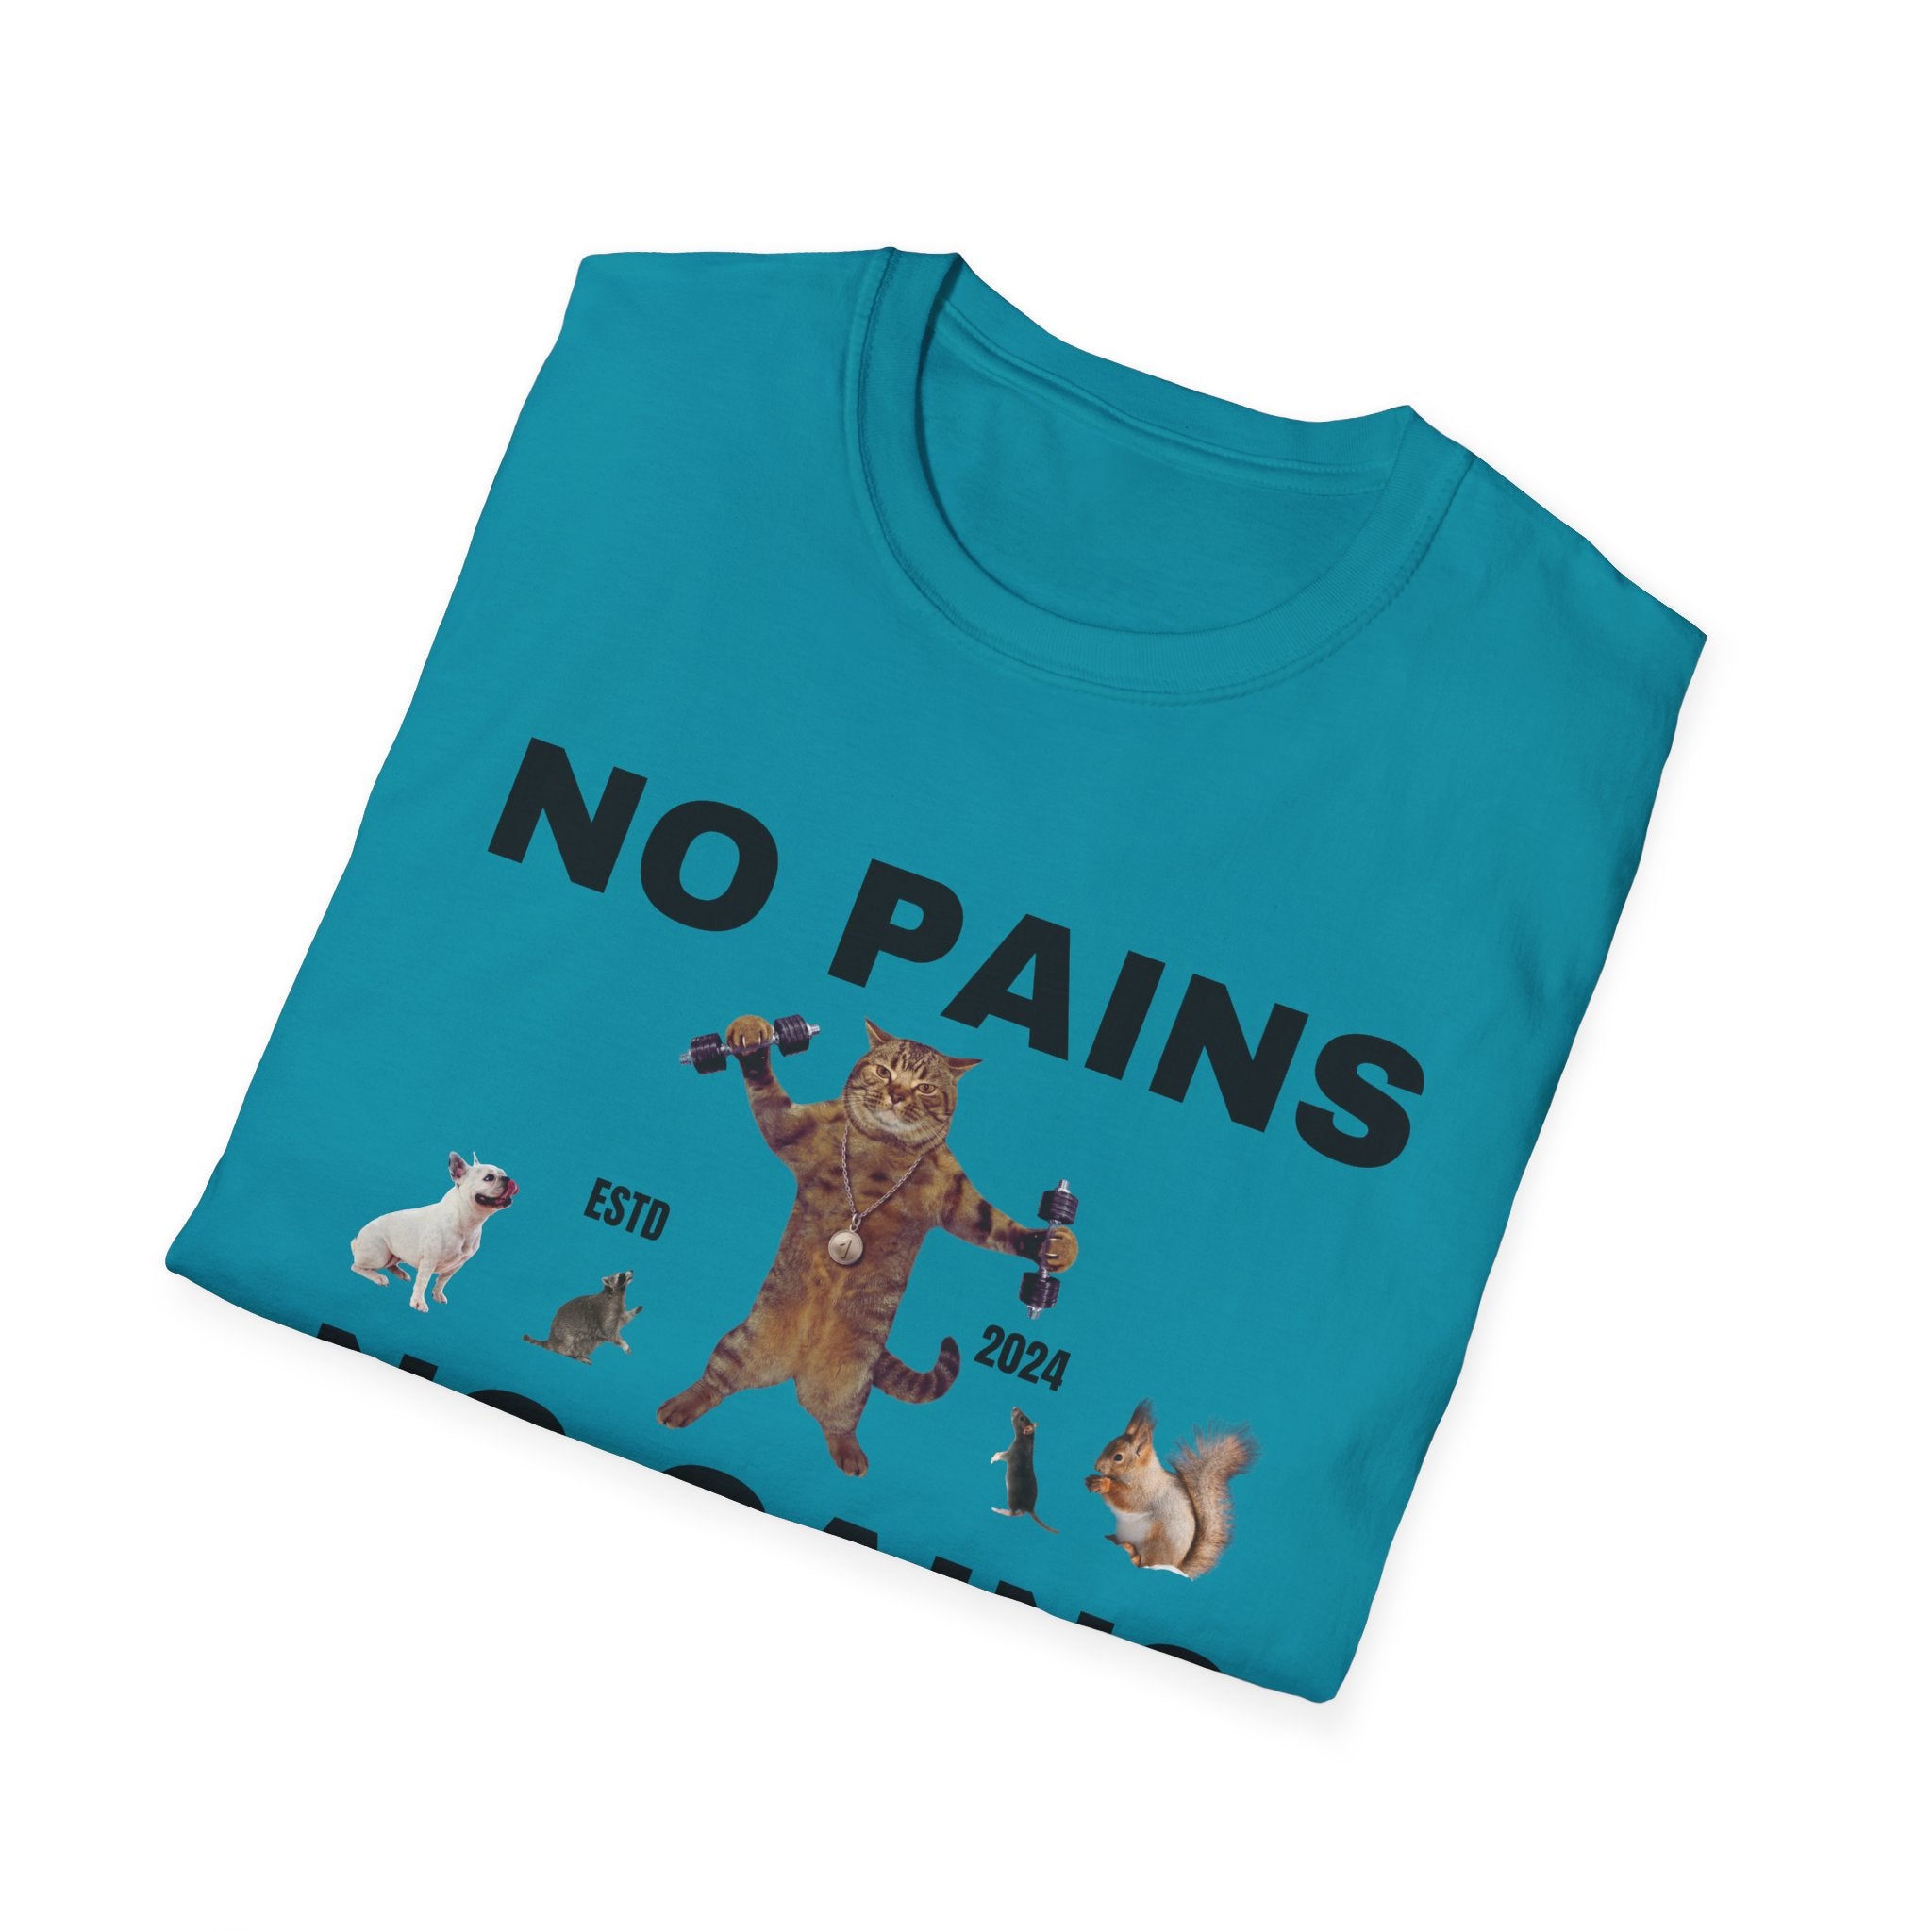 No Pains No Gain Motivational Funny Unisex Softstyle T-Shirt, Gift for him, Gift for Dad, Gift for Boyfriend, Gift for Teacher